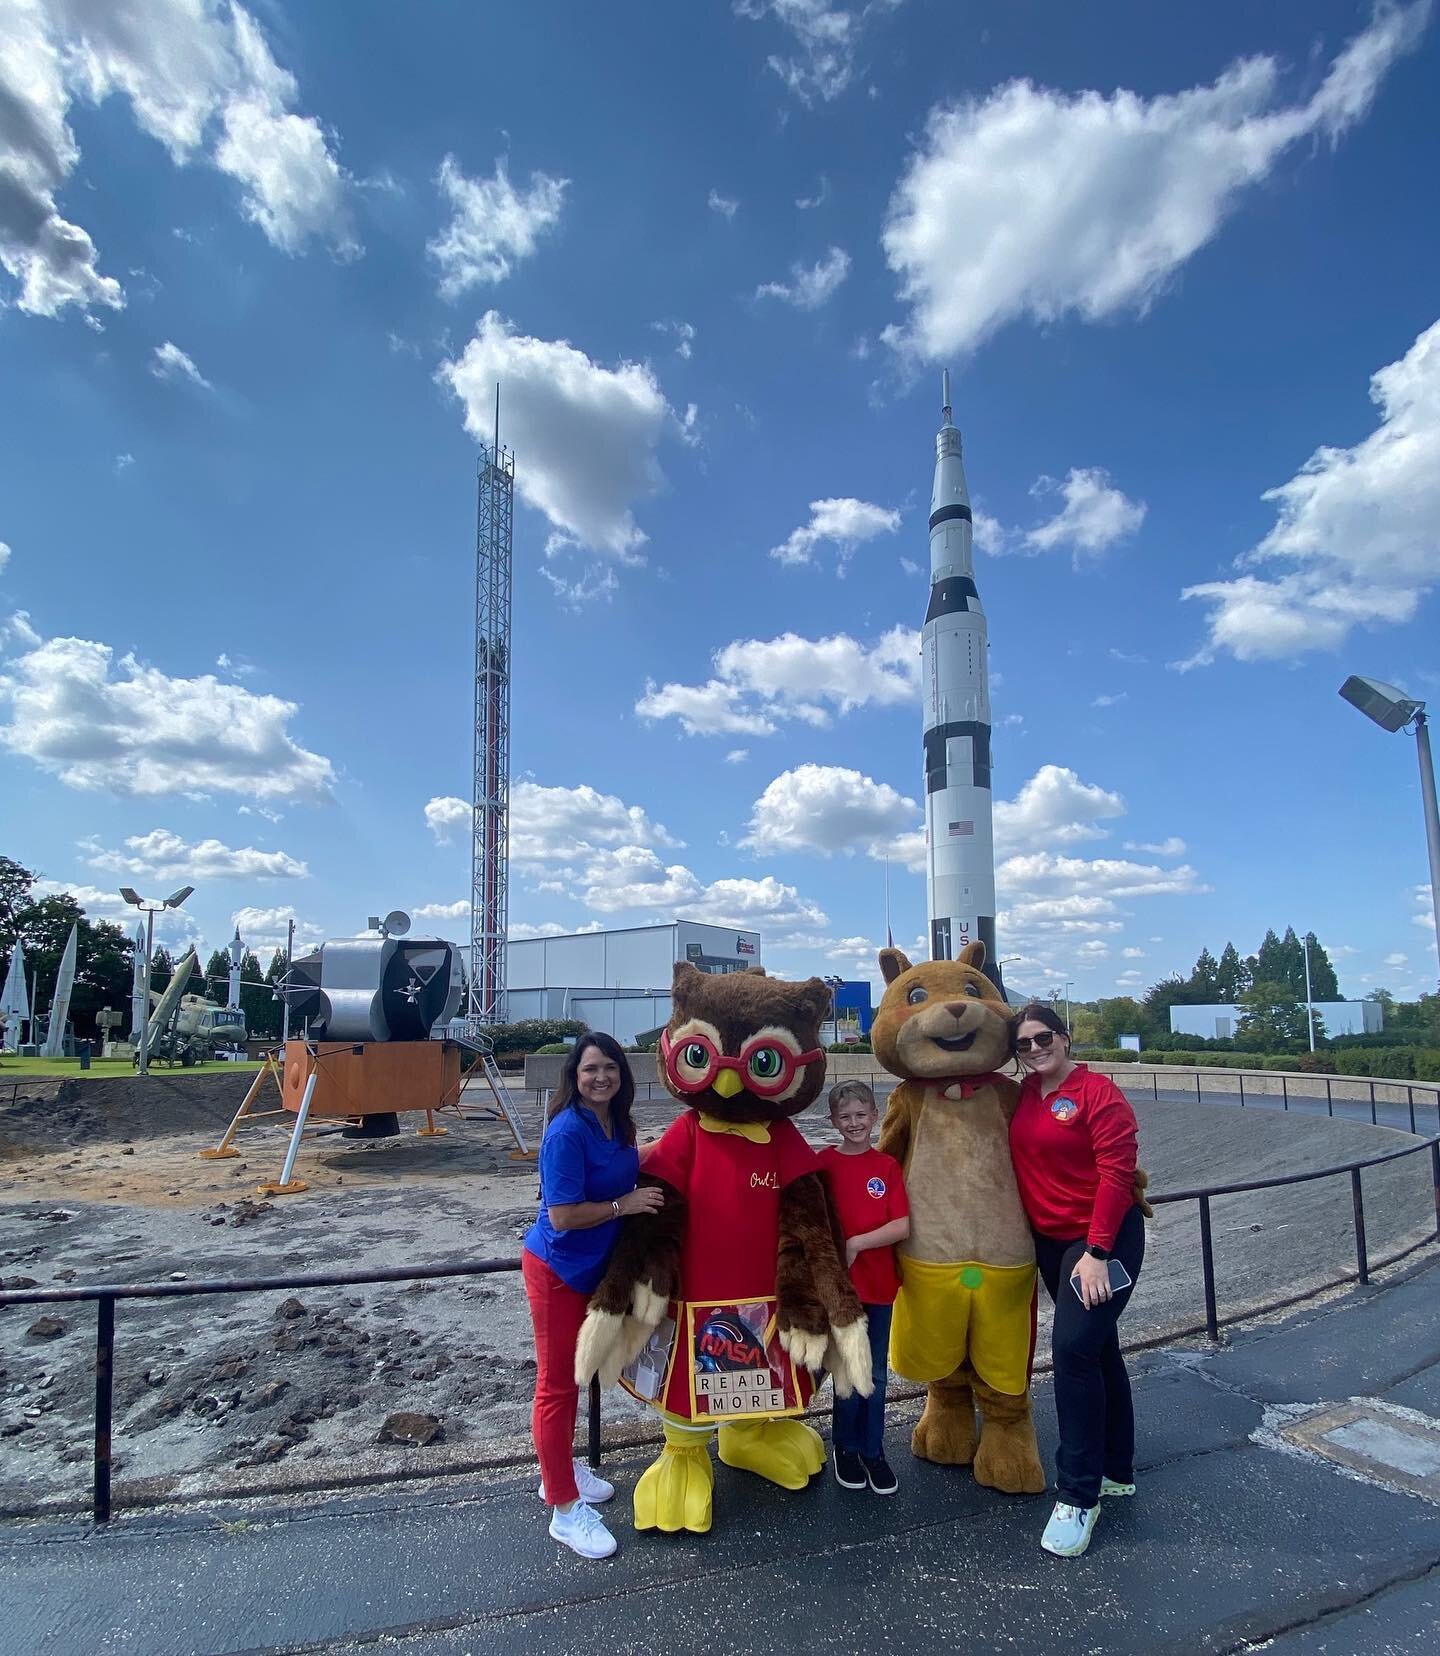 SHORT is walking down MEMORY LANE on this spectacular MONDAY!🥰🤩

Remember when SHORT and Owl-Livia went to Huntville to visit the U.S. Space and Rocket Center?? 🚀 ME TOO! SHORT and Owl-Livia had a BLAST and loved making fun memories at such a cool